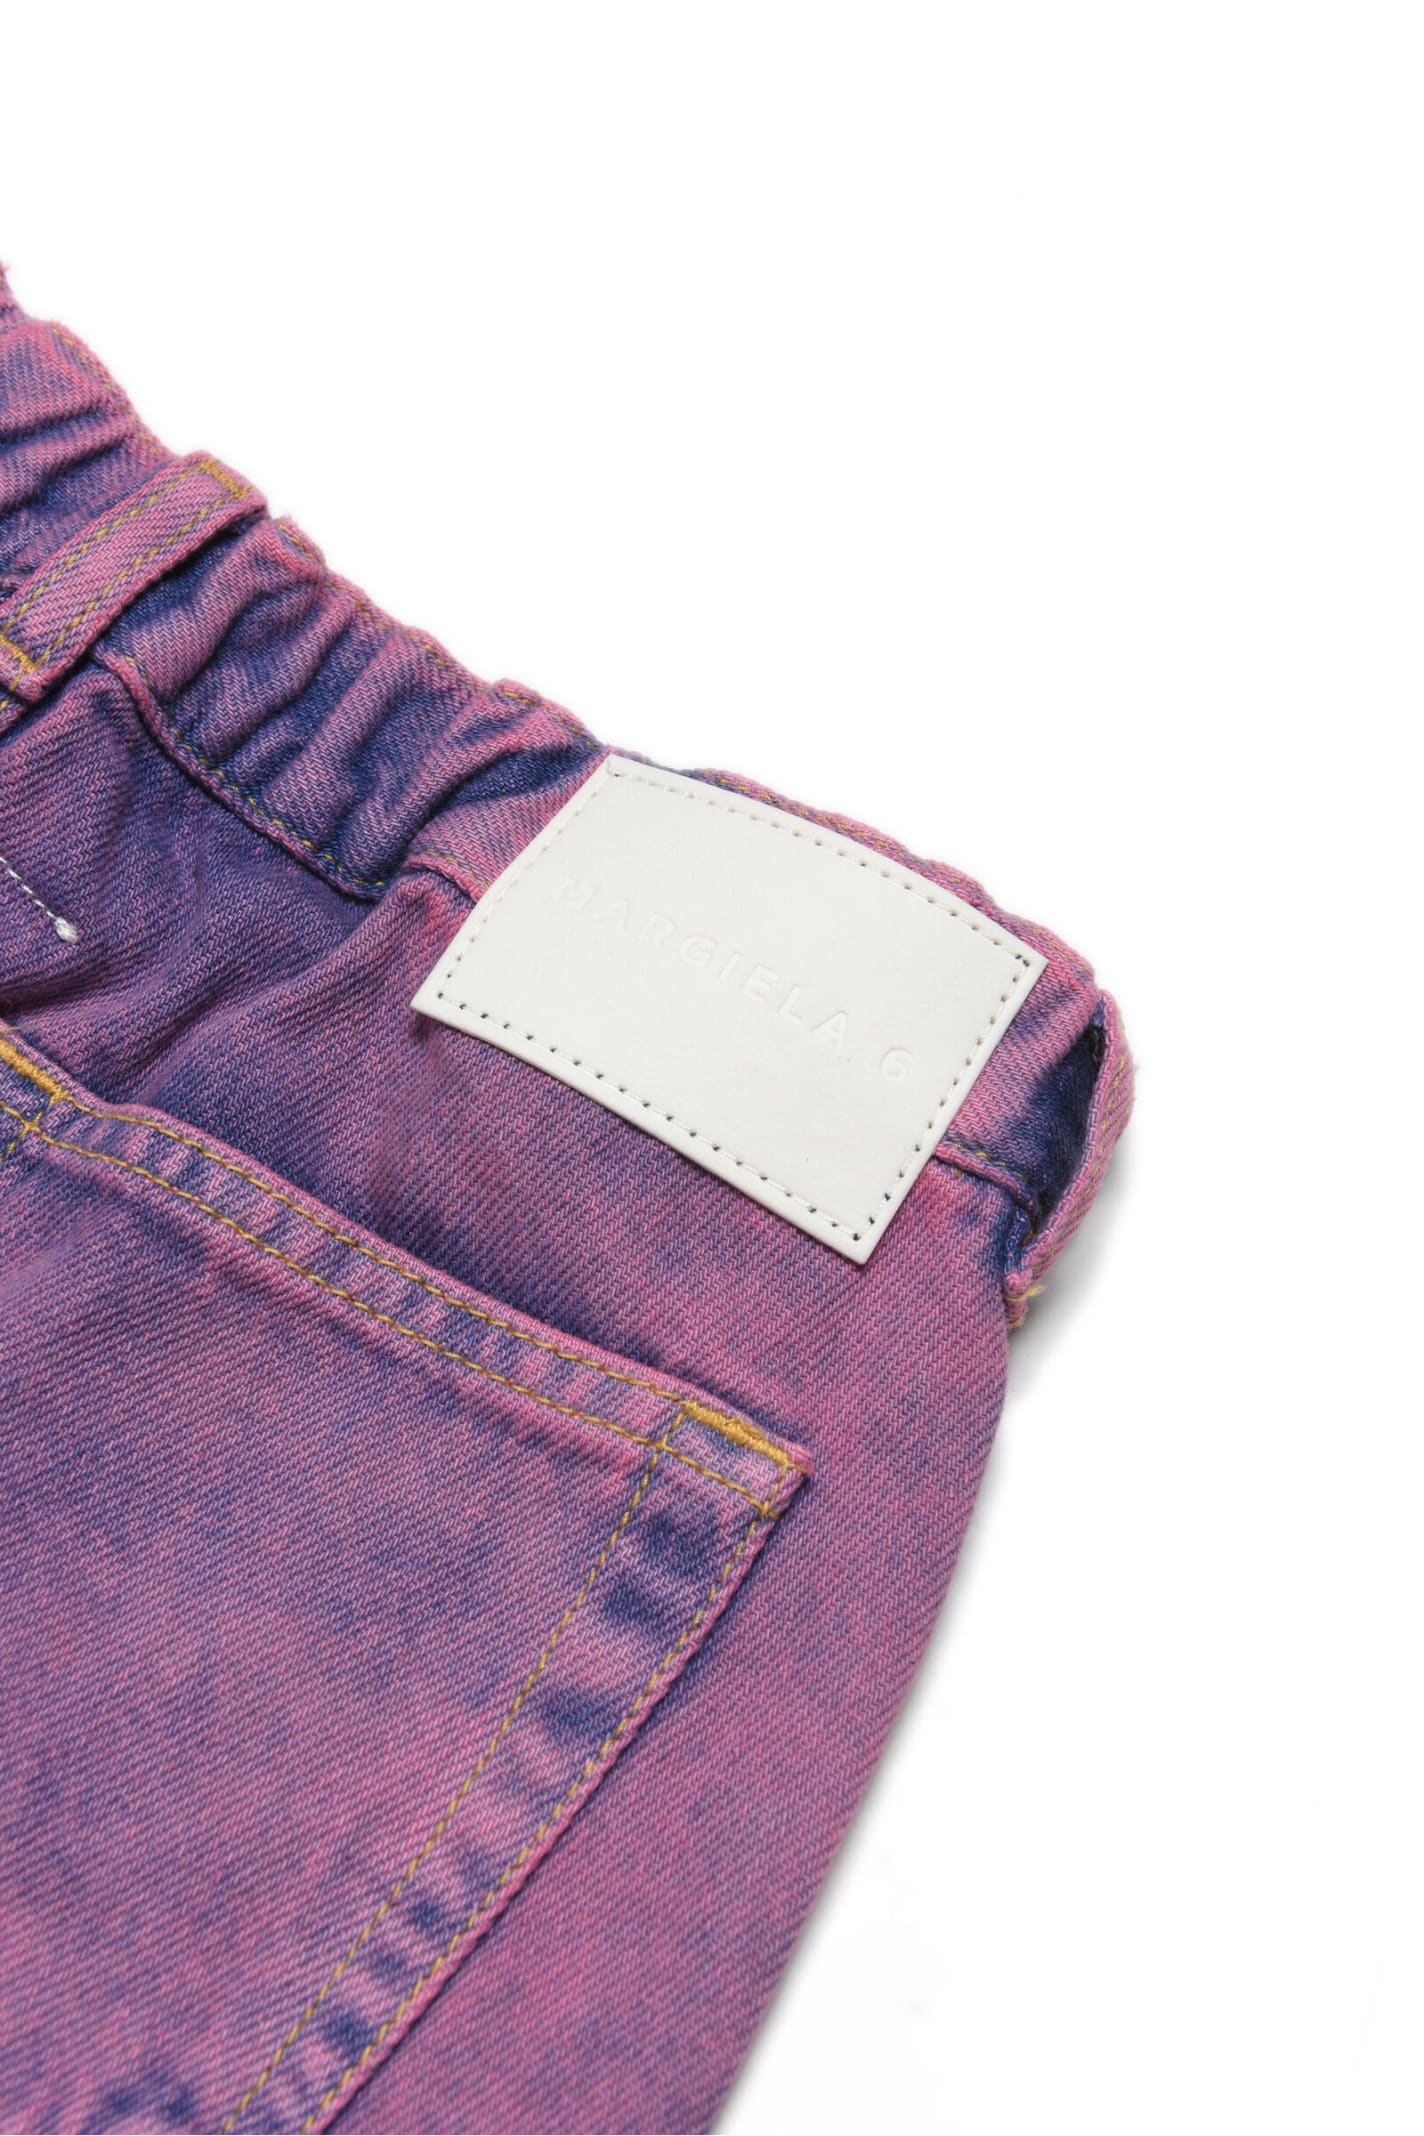 Mm6 Maison Margiela Kids' Distressed Jeans In Pink | ModeSens